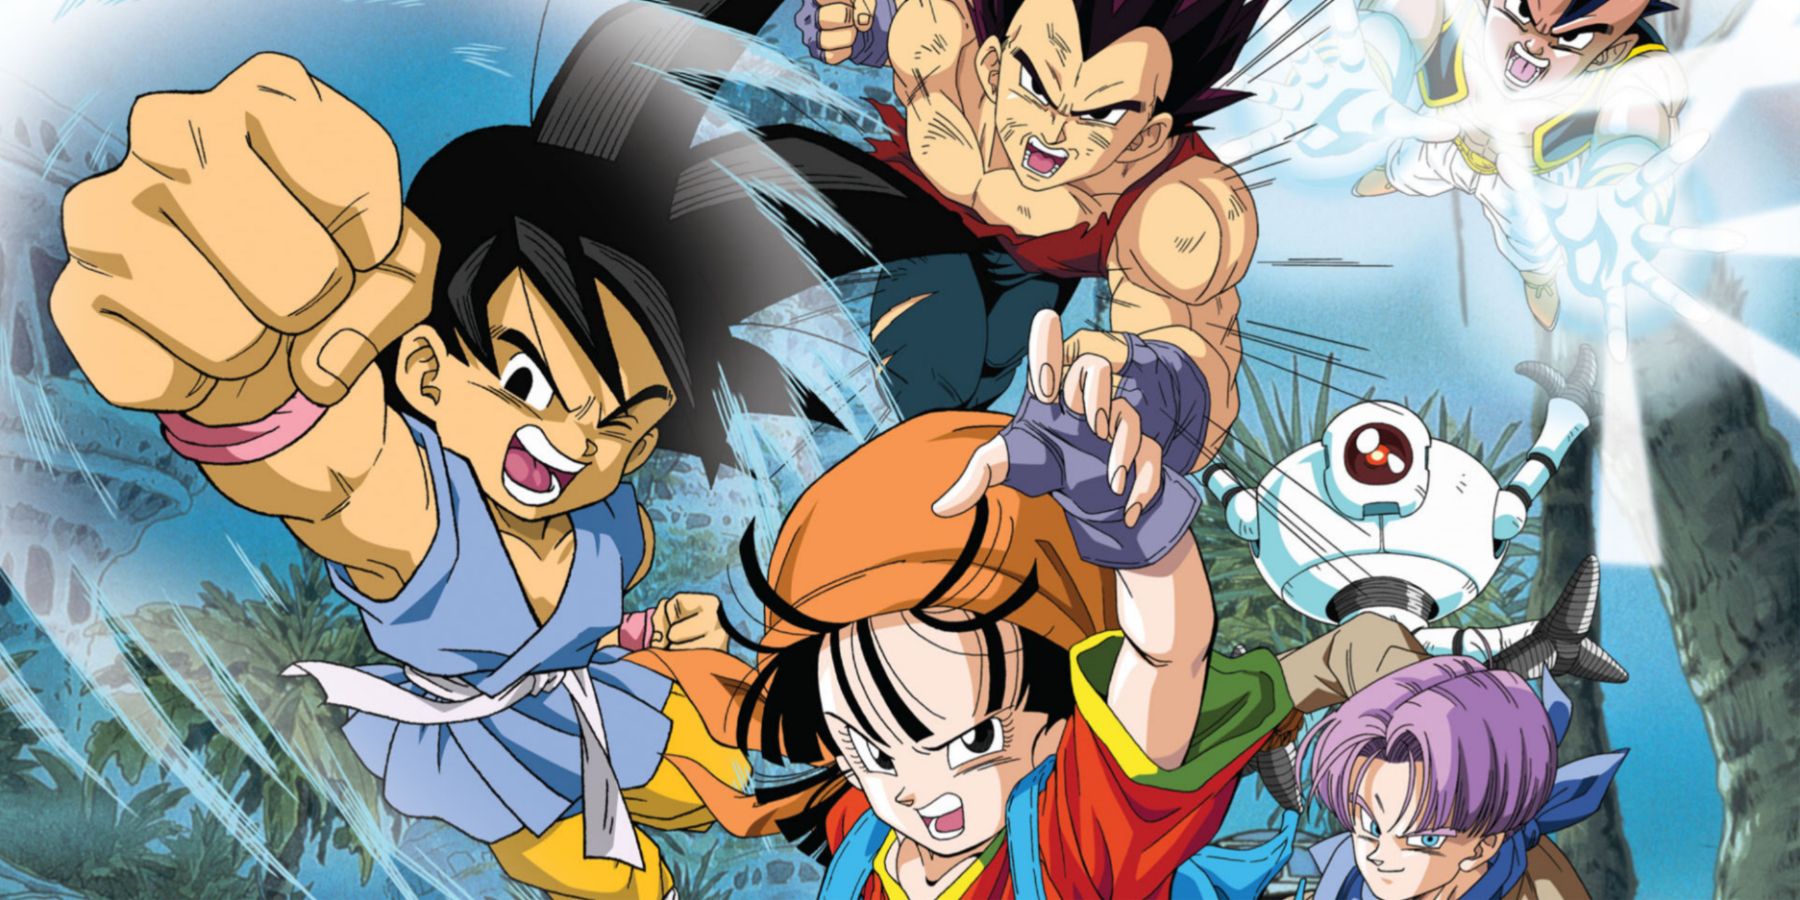 Image of the strange anime sequel to Dragon Ball GT